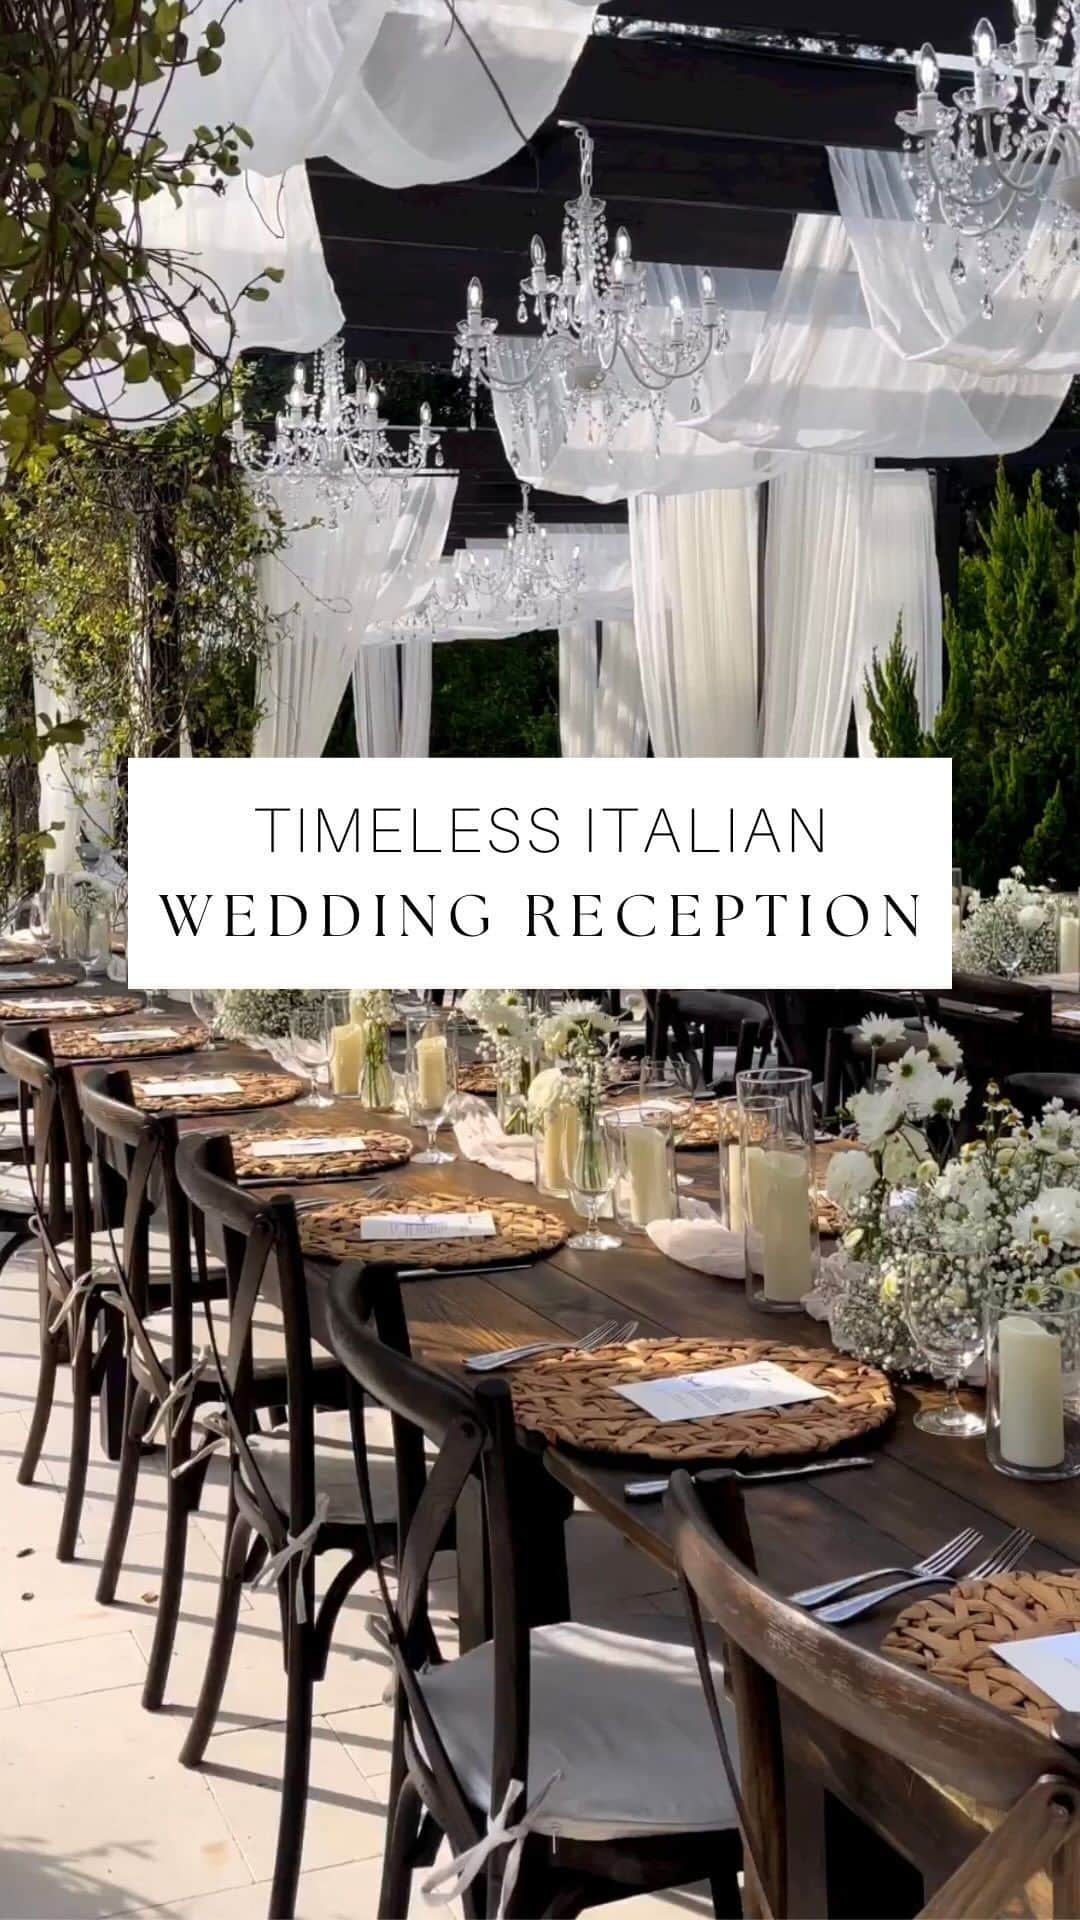 WEDDING APPARELのインスタグラム：「Now this is what Italian wedding dreams are made of 🤍 This reception includes all the right details: suspended chandeliers, white blooms, glowy candlelight & stylish settings that perfectly capture the Tuscan aesthetic✨ Would you opt for a timeless Italian I-do? Tell us in the comments 👇   Planning @lexiandcoevents Florals @somethingbloomedswfl Venue: @lacasatoscana   #weddinginspo  #weddingplanning #weddingreception #weddingreceptionideas  #weddingreceptiondecor  #weddingdetails #weddingdecor #receptiondecor  #weddingday #tuscanwedding #italianwedding #italywedding #outdoorwedding #weddingideas #weddingdecoration #weddinginspiration  #weddingtablesetting #weddingtable #lakecomowedding #weddingideas #destinationwedding #elopementwedding #weddings #weddingphotography #eventdecoration  #weddingtabledecor」